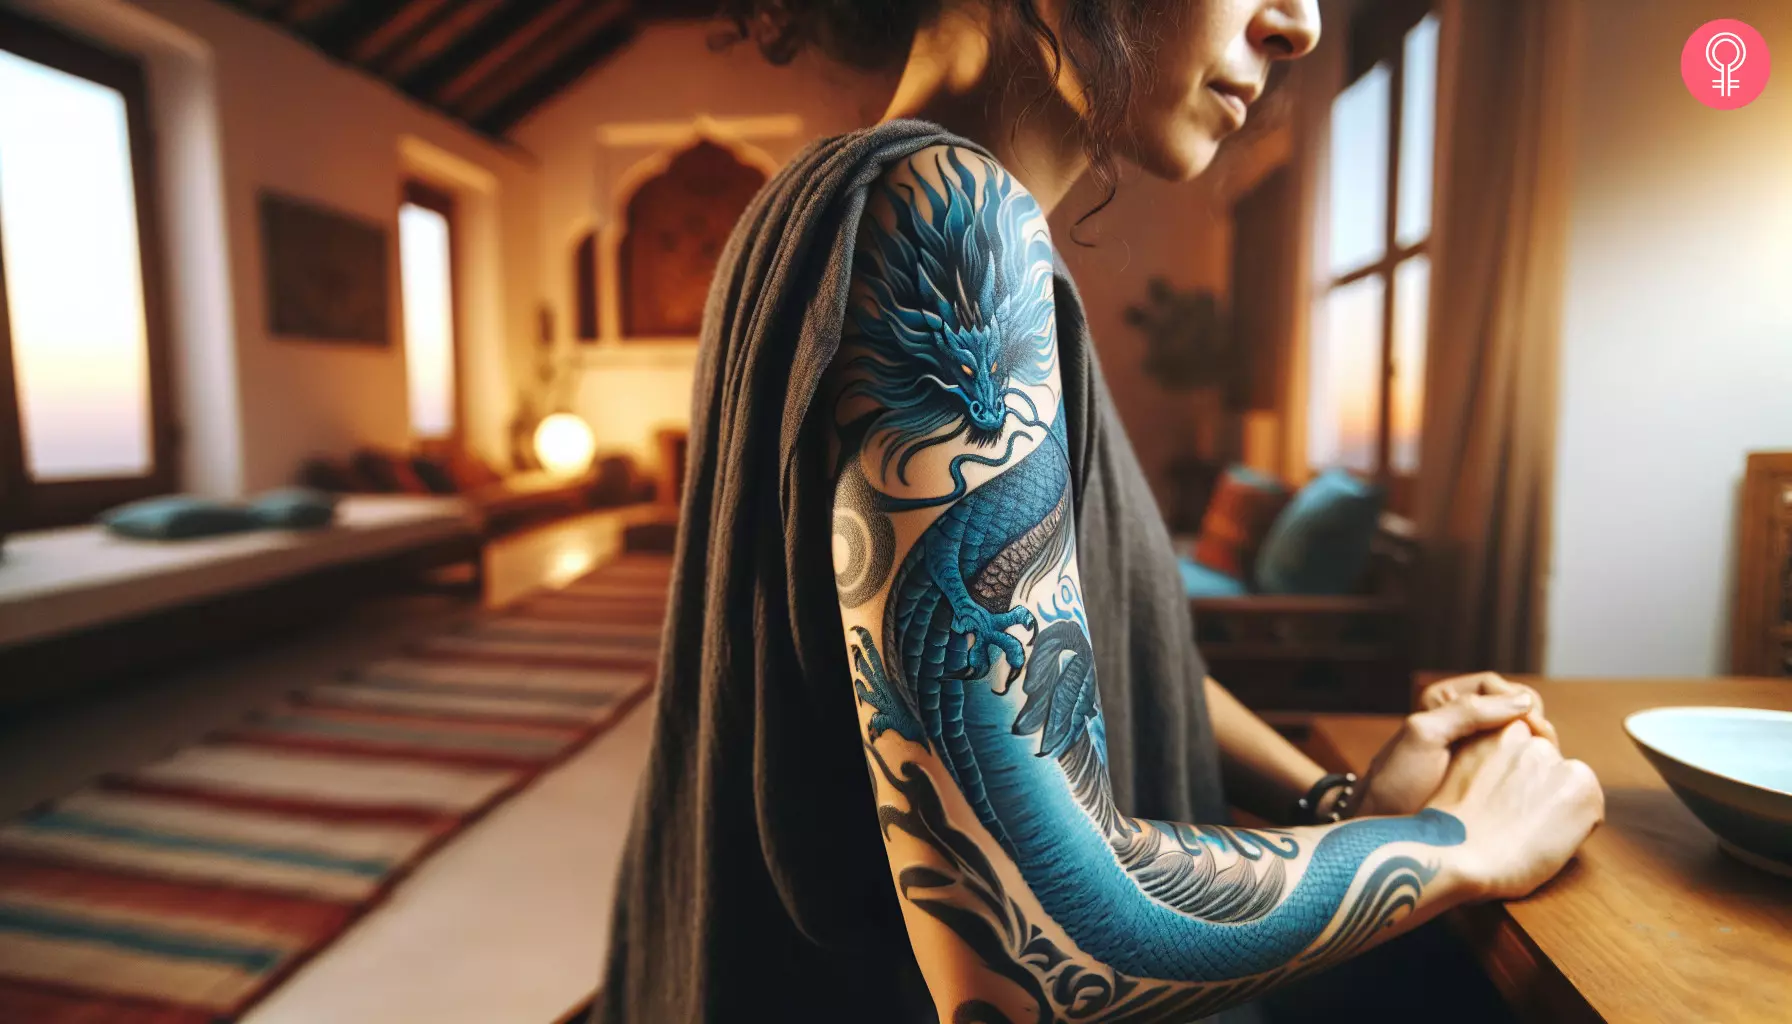 A blue dragon tattoo covering the arm of a woman